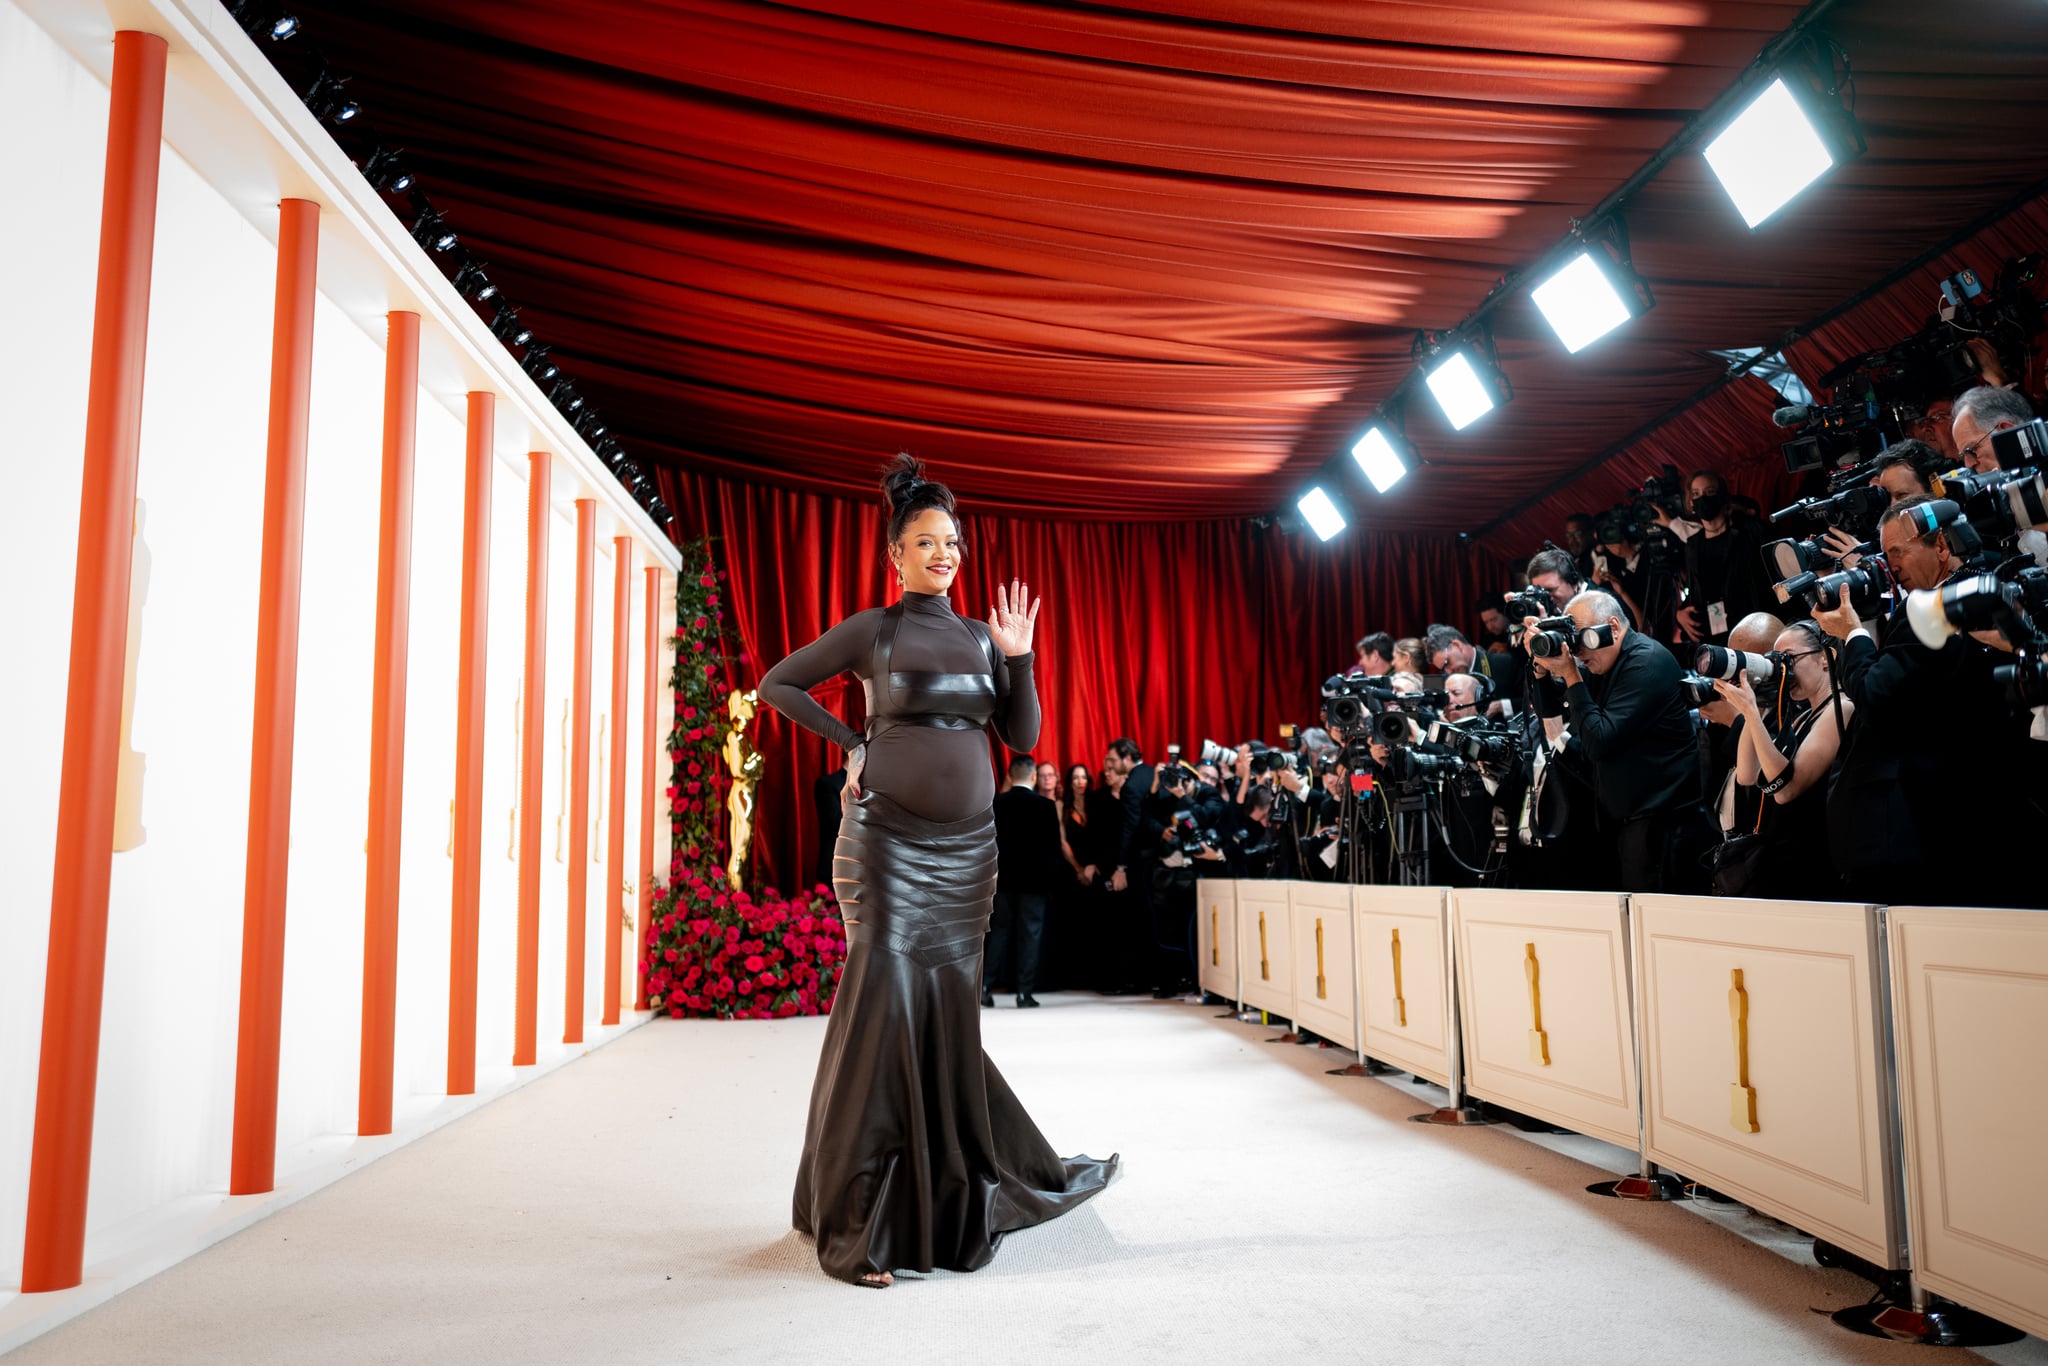 HOLLYWOOD, CALIFORNIA - MARCH 12: Rihanna attends the 95th Annual Academy Awards at Hollywood & Highland on March 12, 2023 in Hollywood, California. (Photo by Emma McIntyre/Getty Images)